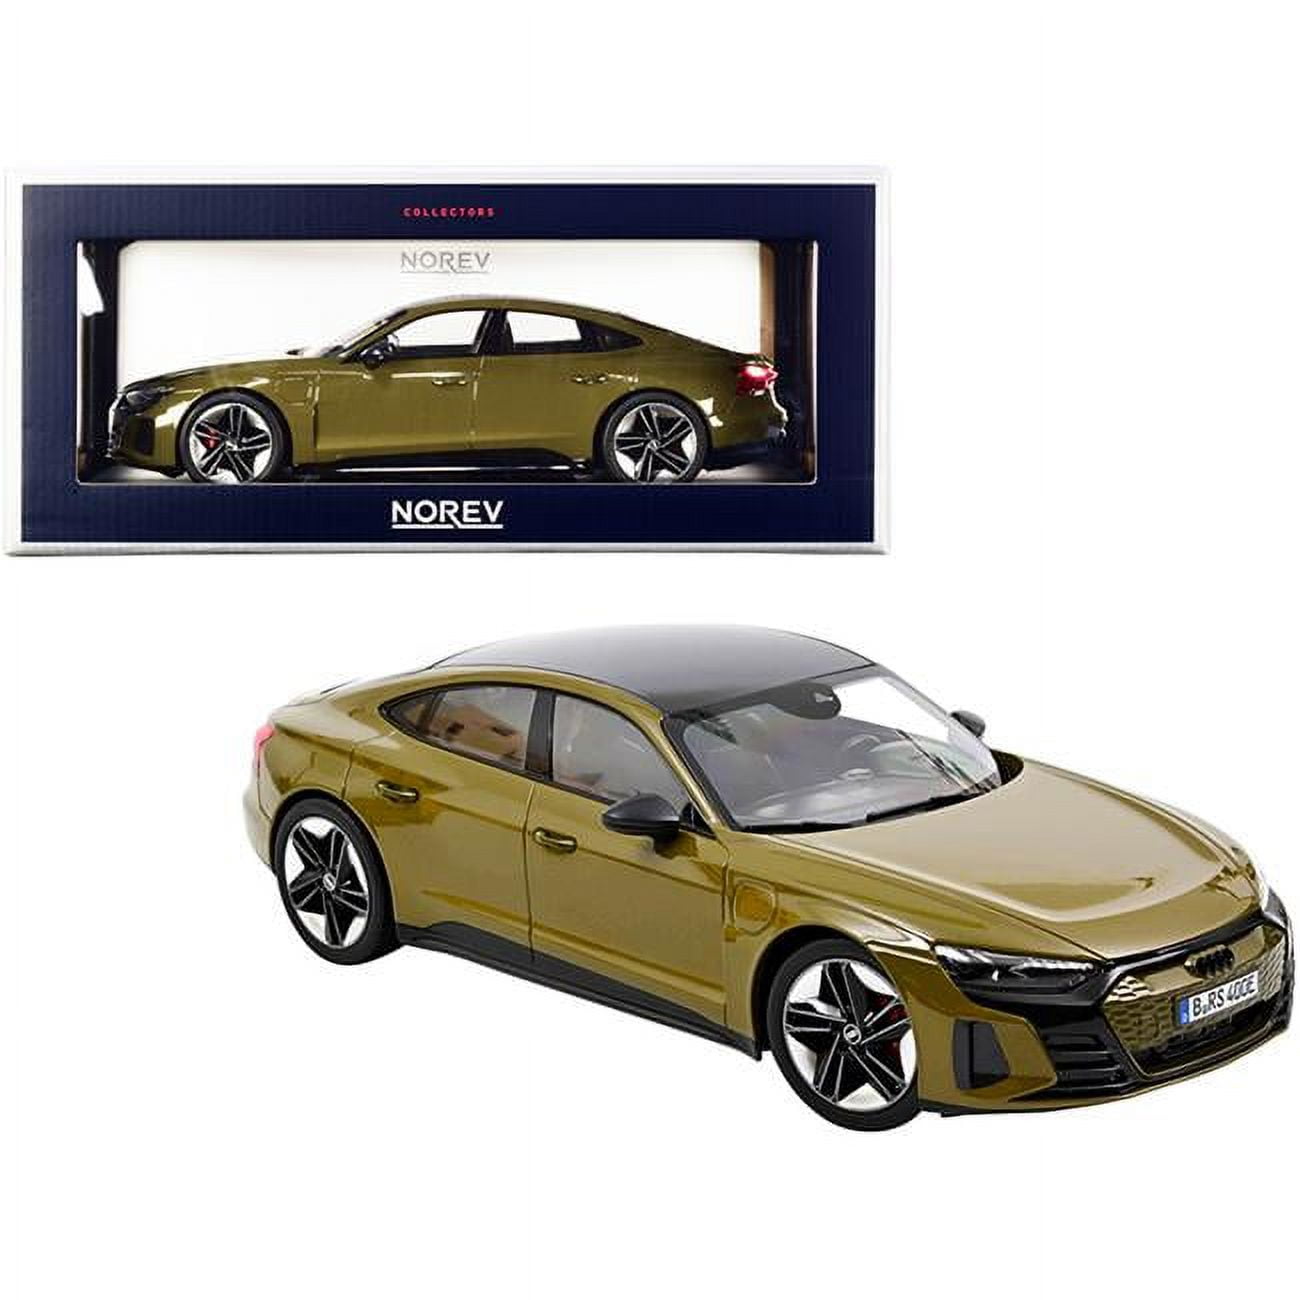 Picture of Norev 188380 1-18 Scale 2021 Audi RS E-Tron GT Top Diecast Model Car with Carbon, Metallic Olive Green